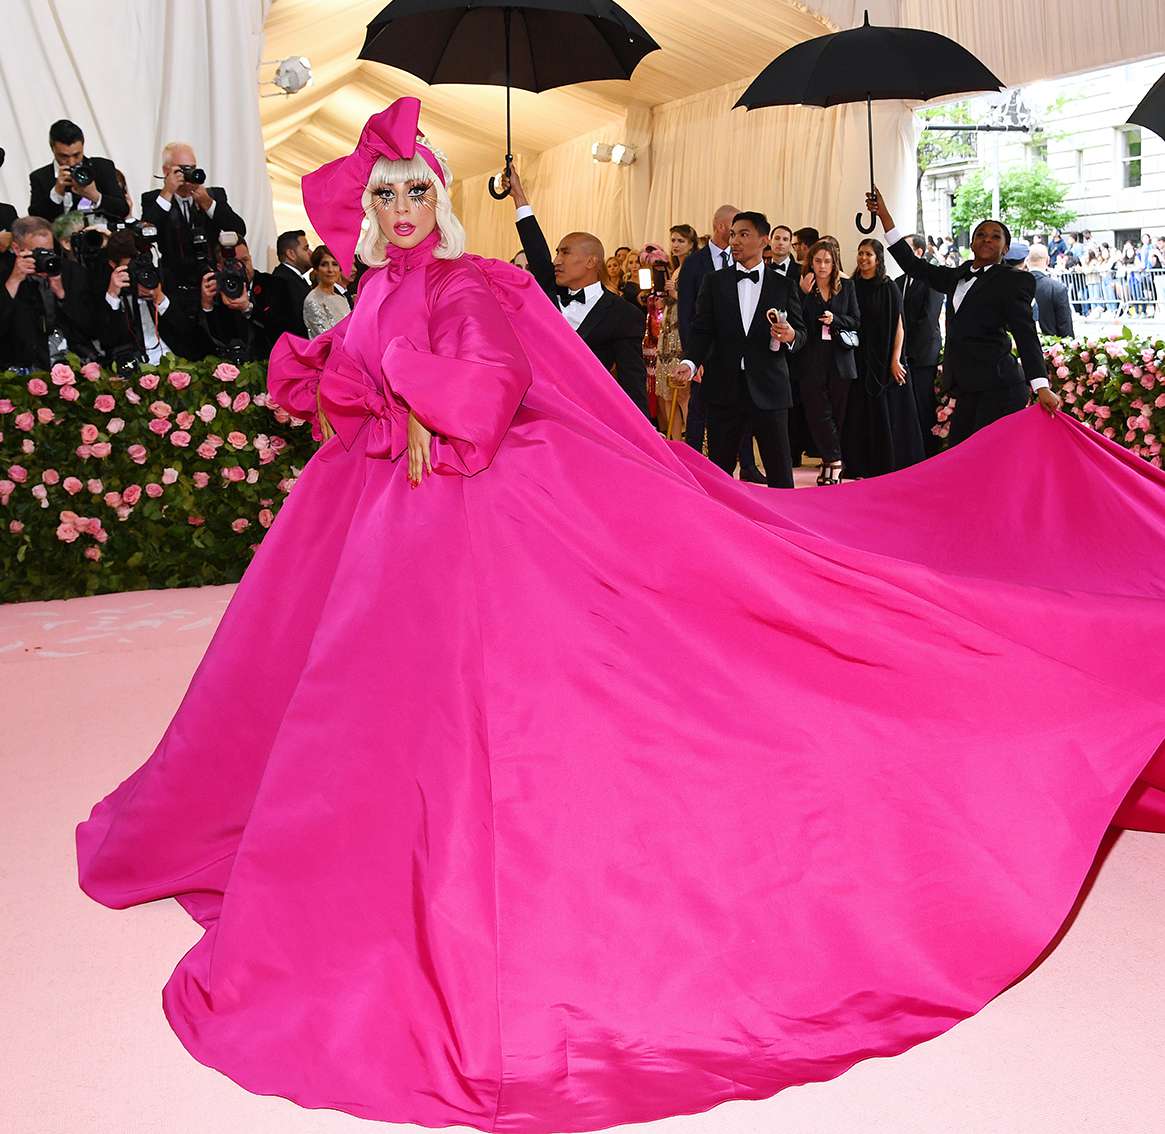 NEW YORK, NEW YORK - MAY 06: Lady Gaga attends The 2019 Met Gala Celebrating Camp: Notes on Fashion at Metropolitan Museum of Art on May 06, 2019 in New York City. (Photo by Dimitrios Kambouris/Getty Images for The Met Museum/Vogue)